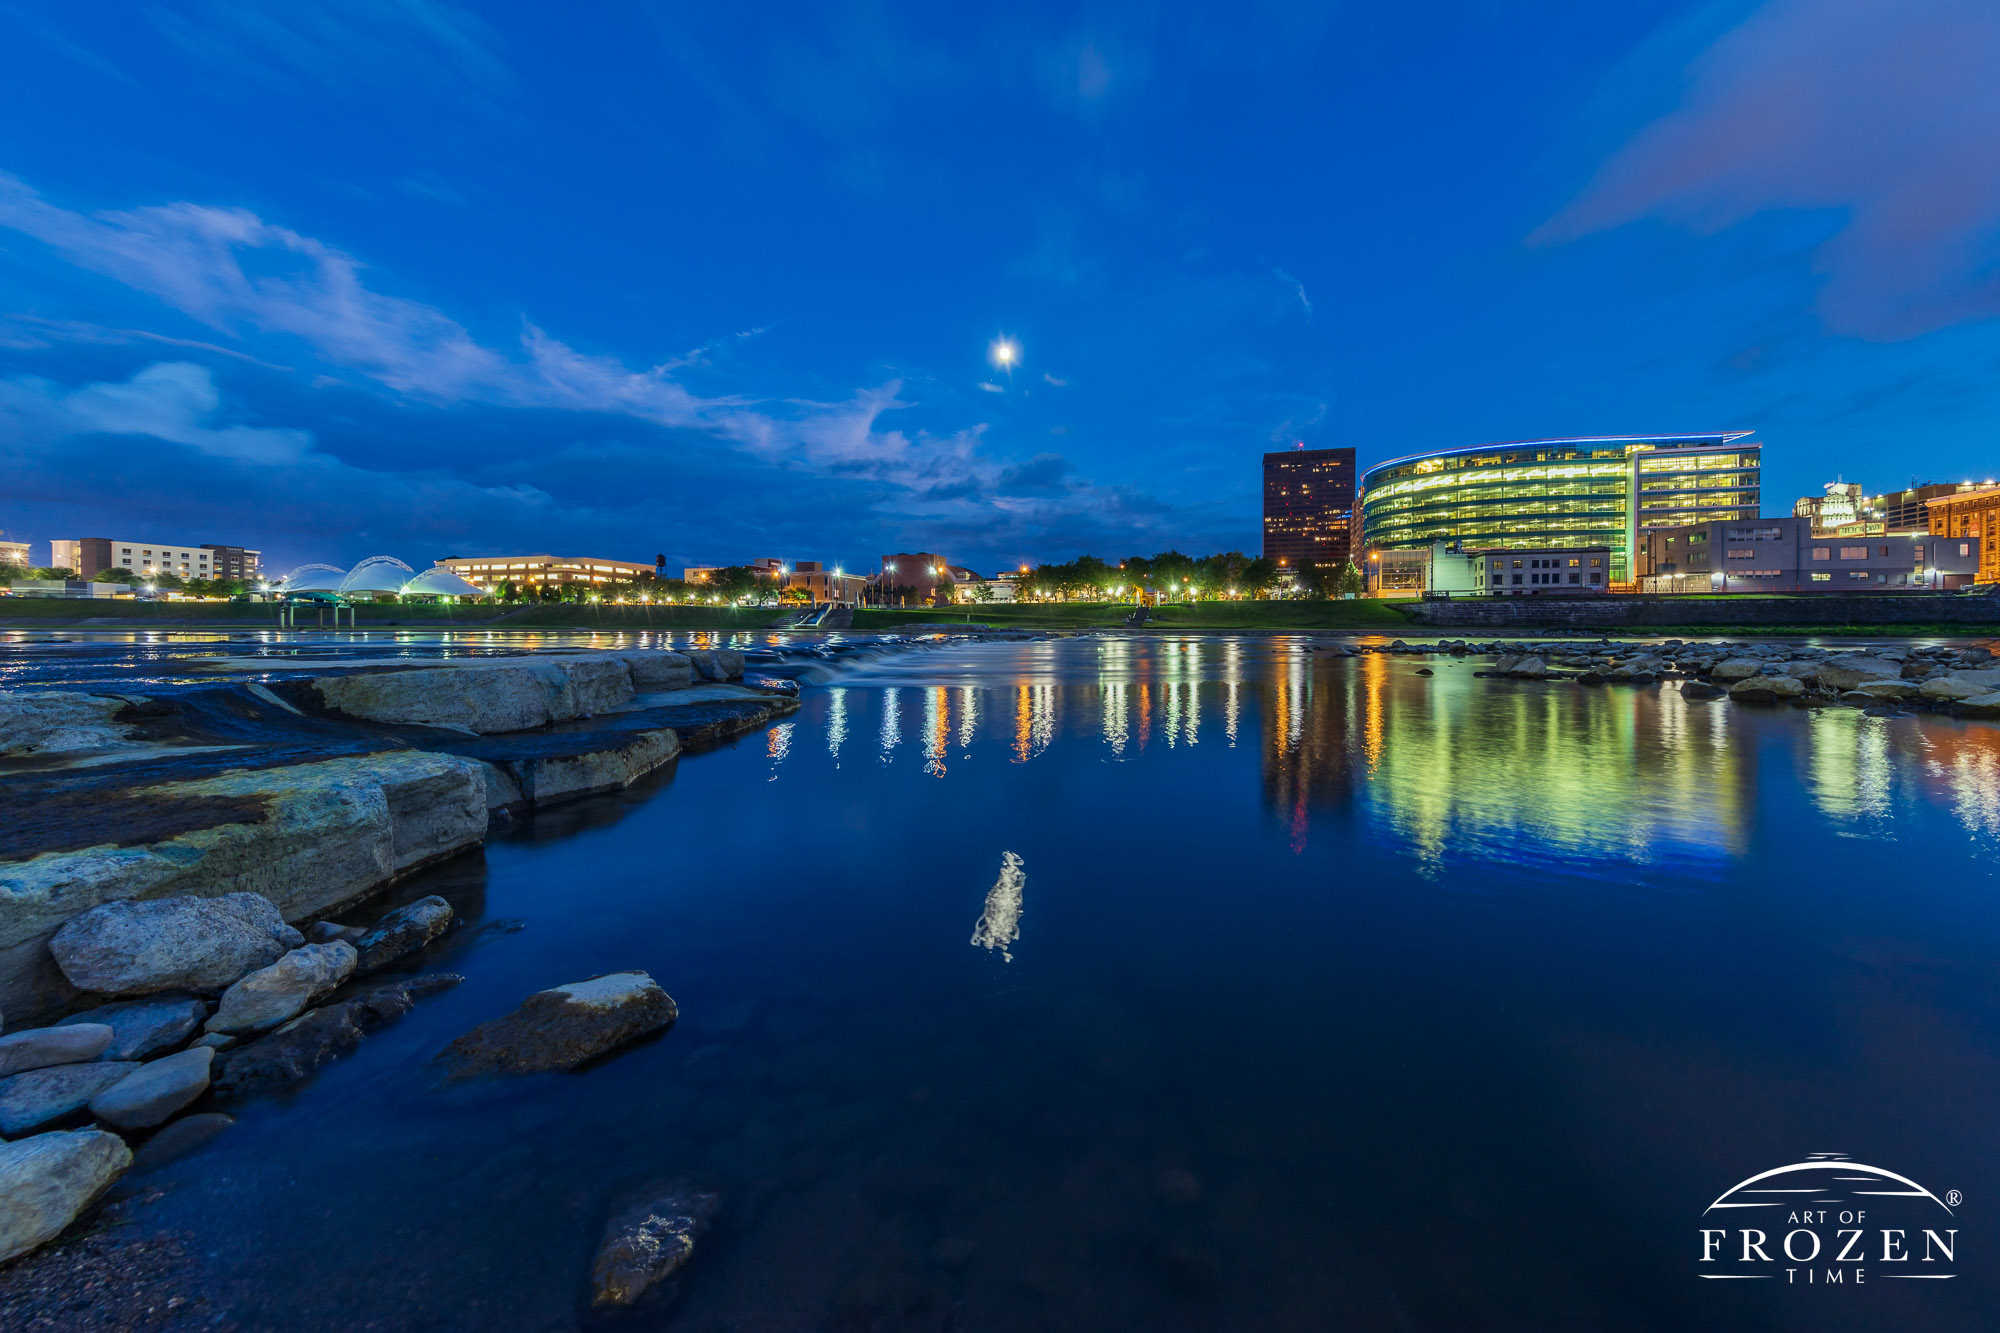 A twilight image of RiverScape’s RiverRun where the kayak chutes lead the eye to the opposite shoreline and the warmly lit CareSource Building all under the nighttime glow of a moon